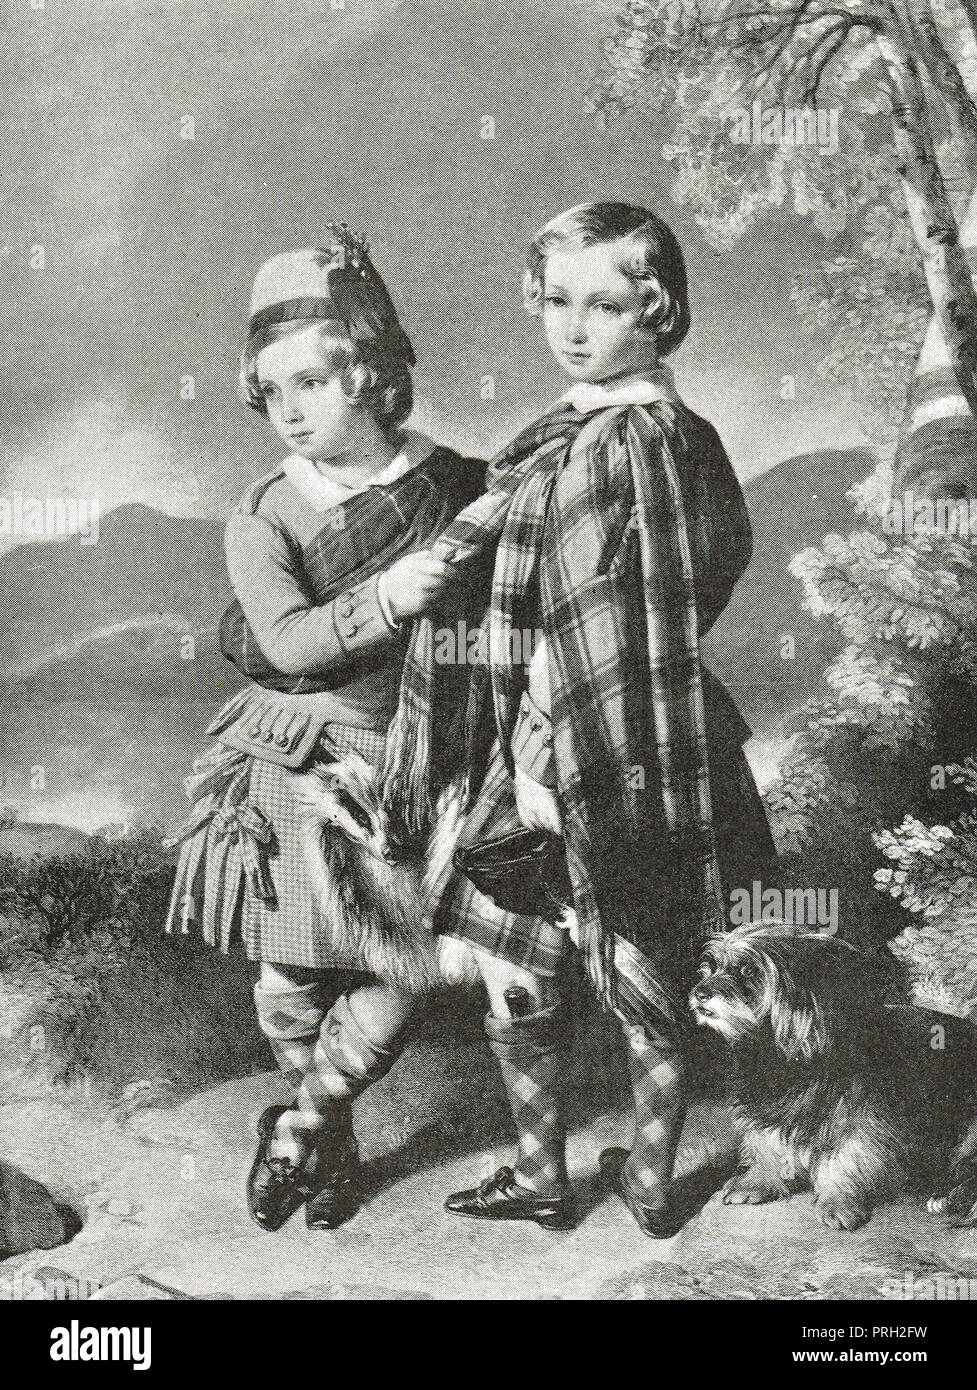 Prince Albert Edward, Prince of Wales, future King Edward VII, with his younger brother Alfred, in highland dress, in 1849 Stock Photo